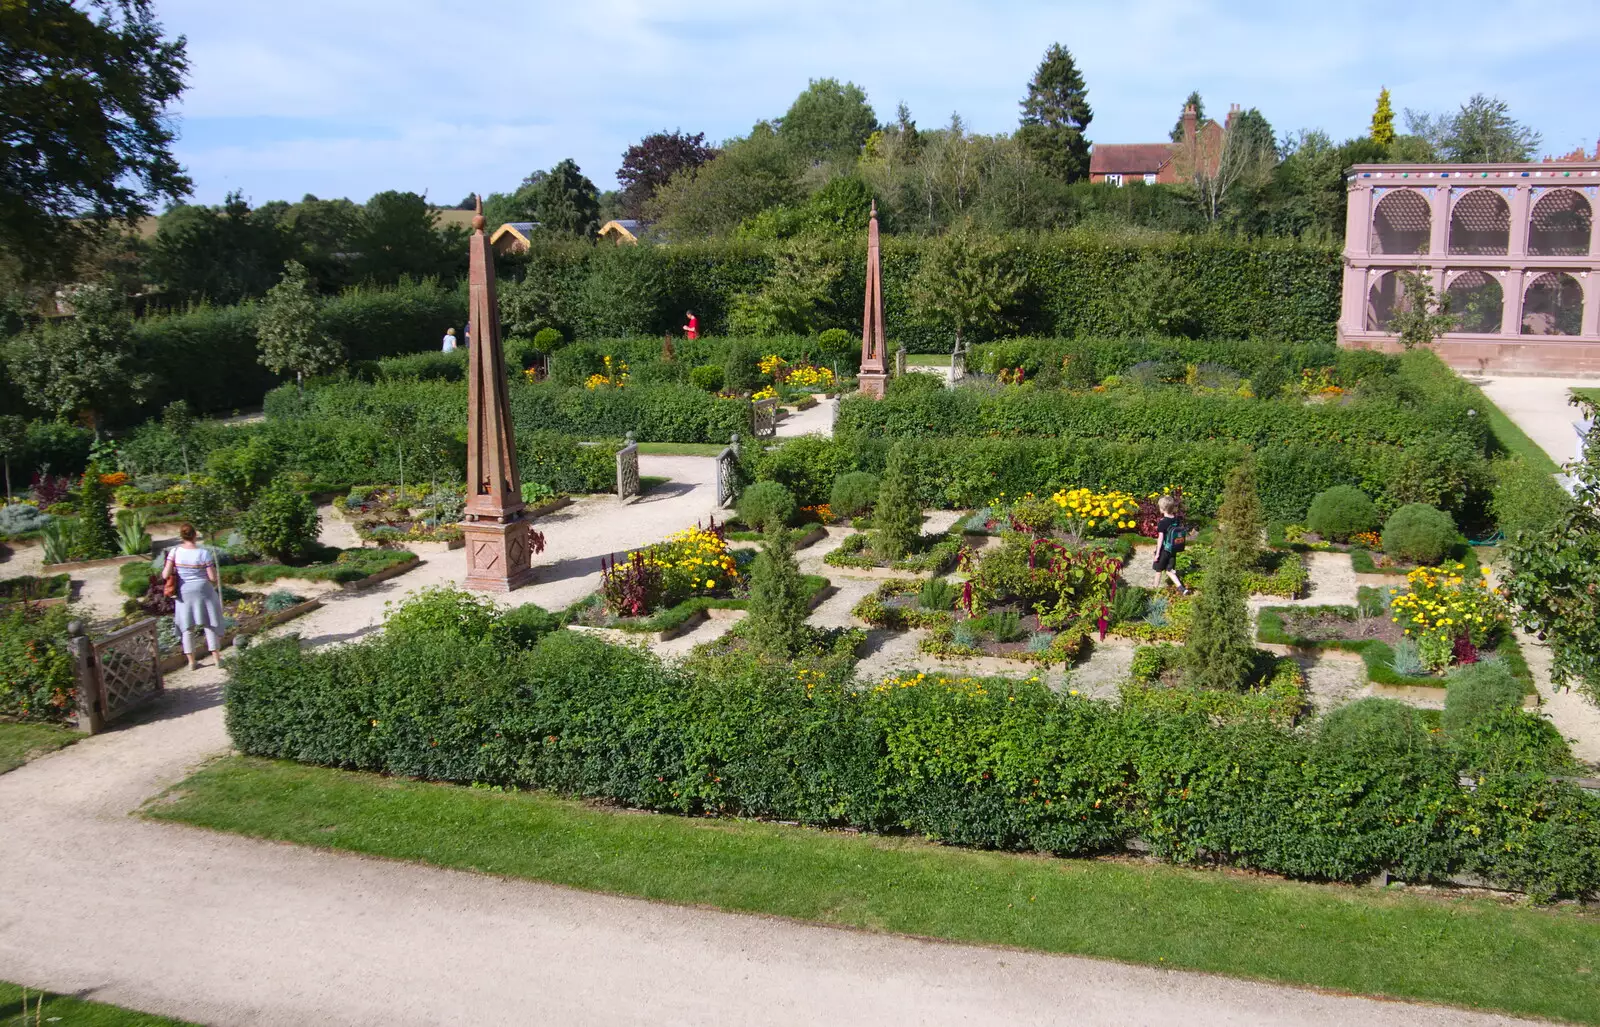 The Italianate garden, from Kenilworth Castle and the 69th Entry Reunion Dinner, Stratford, Warwickshire - 14th September 2019